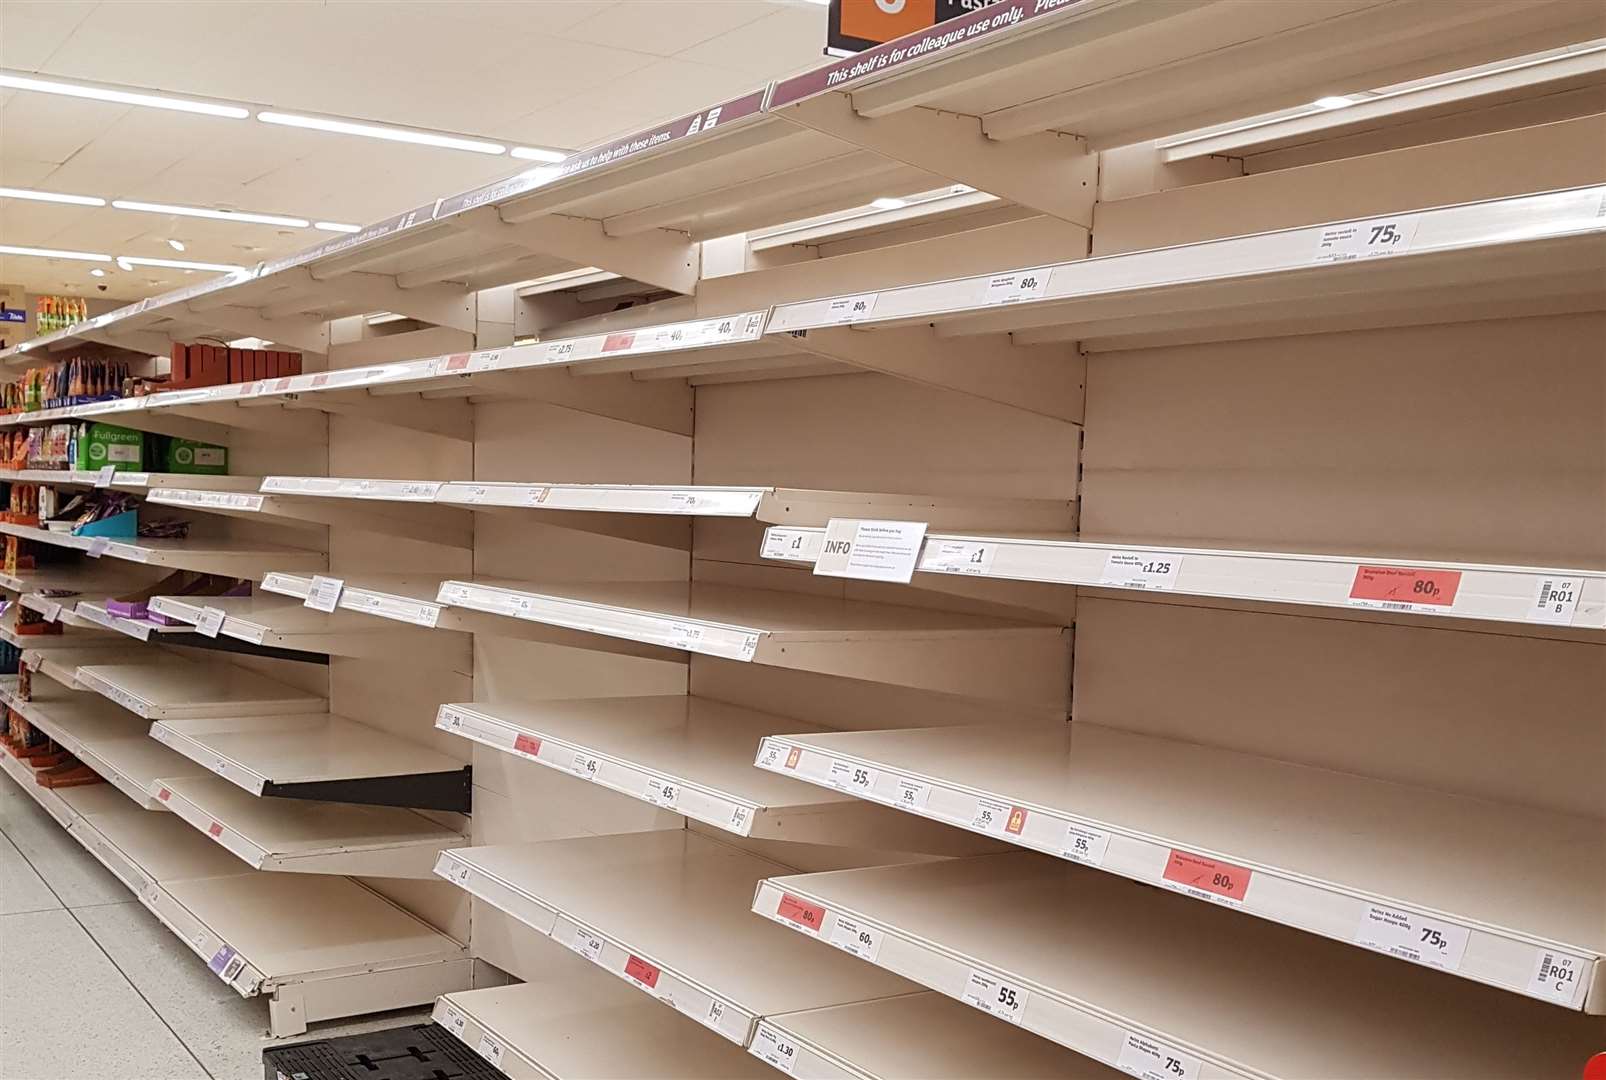 Could we see a repeat of the empty shelves seen during the first lockdown - then it was case of demand outstripping supply